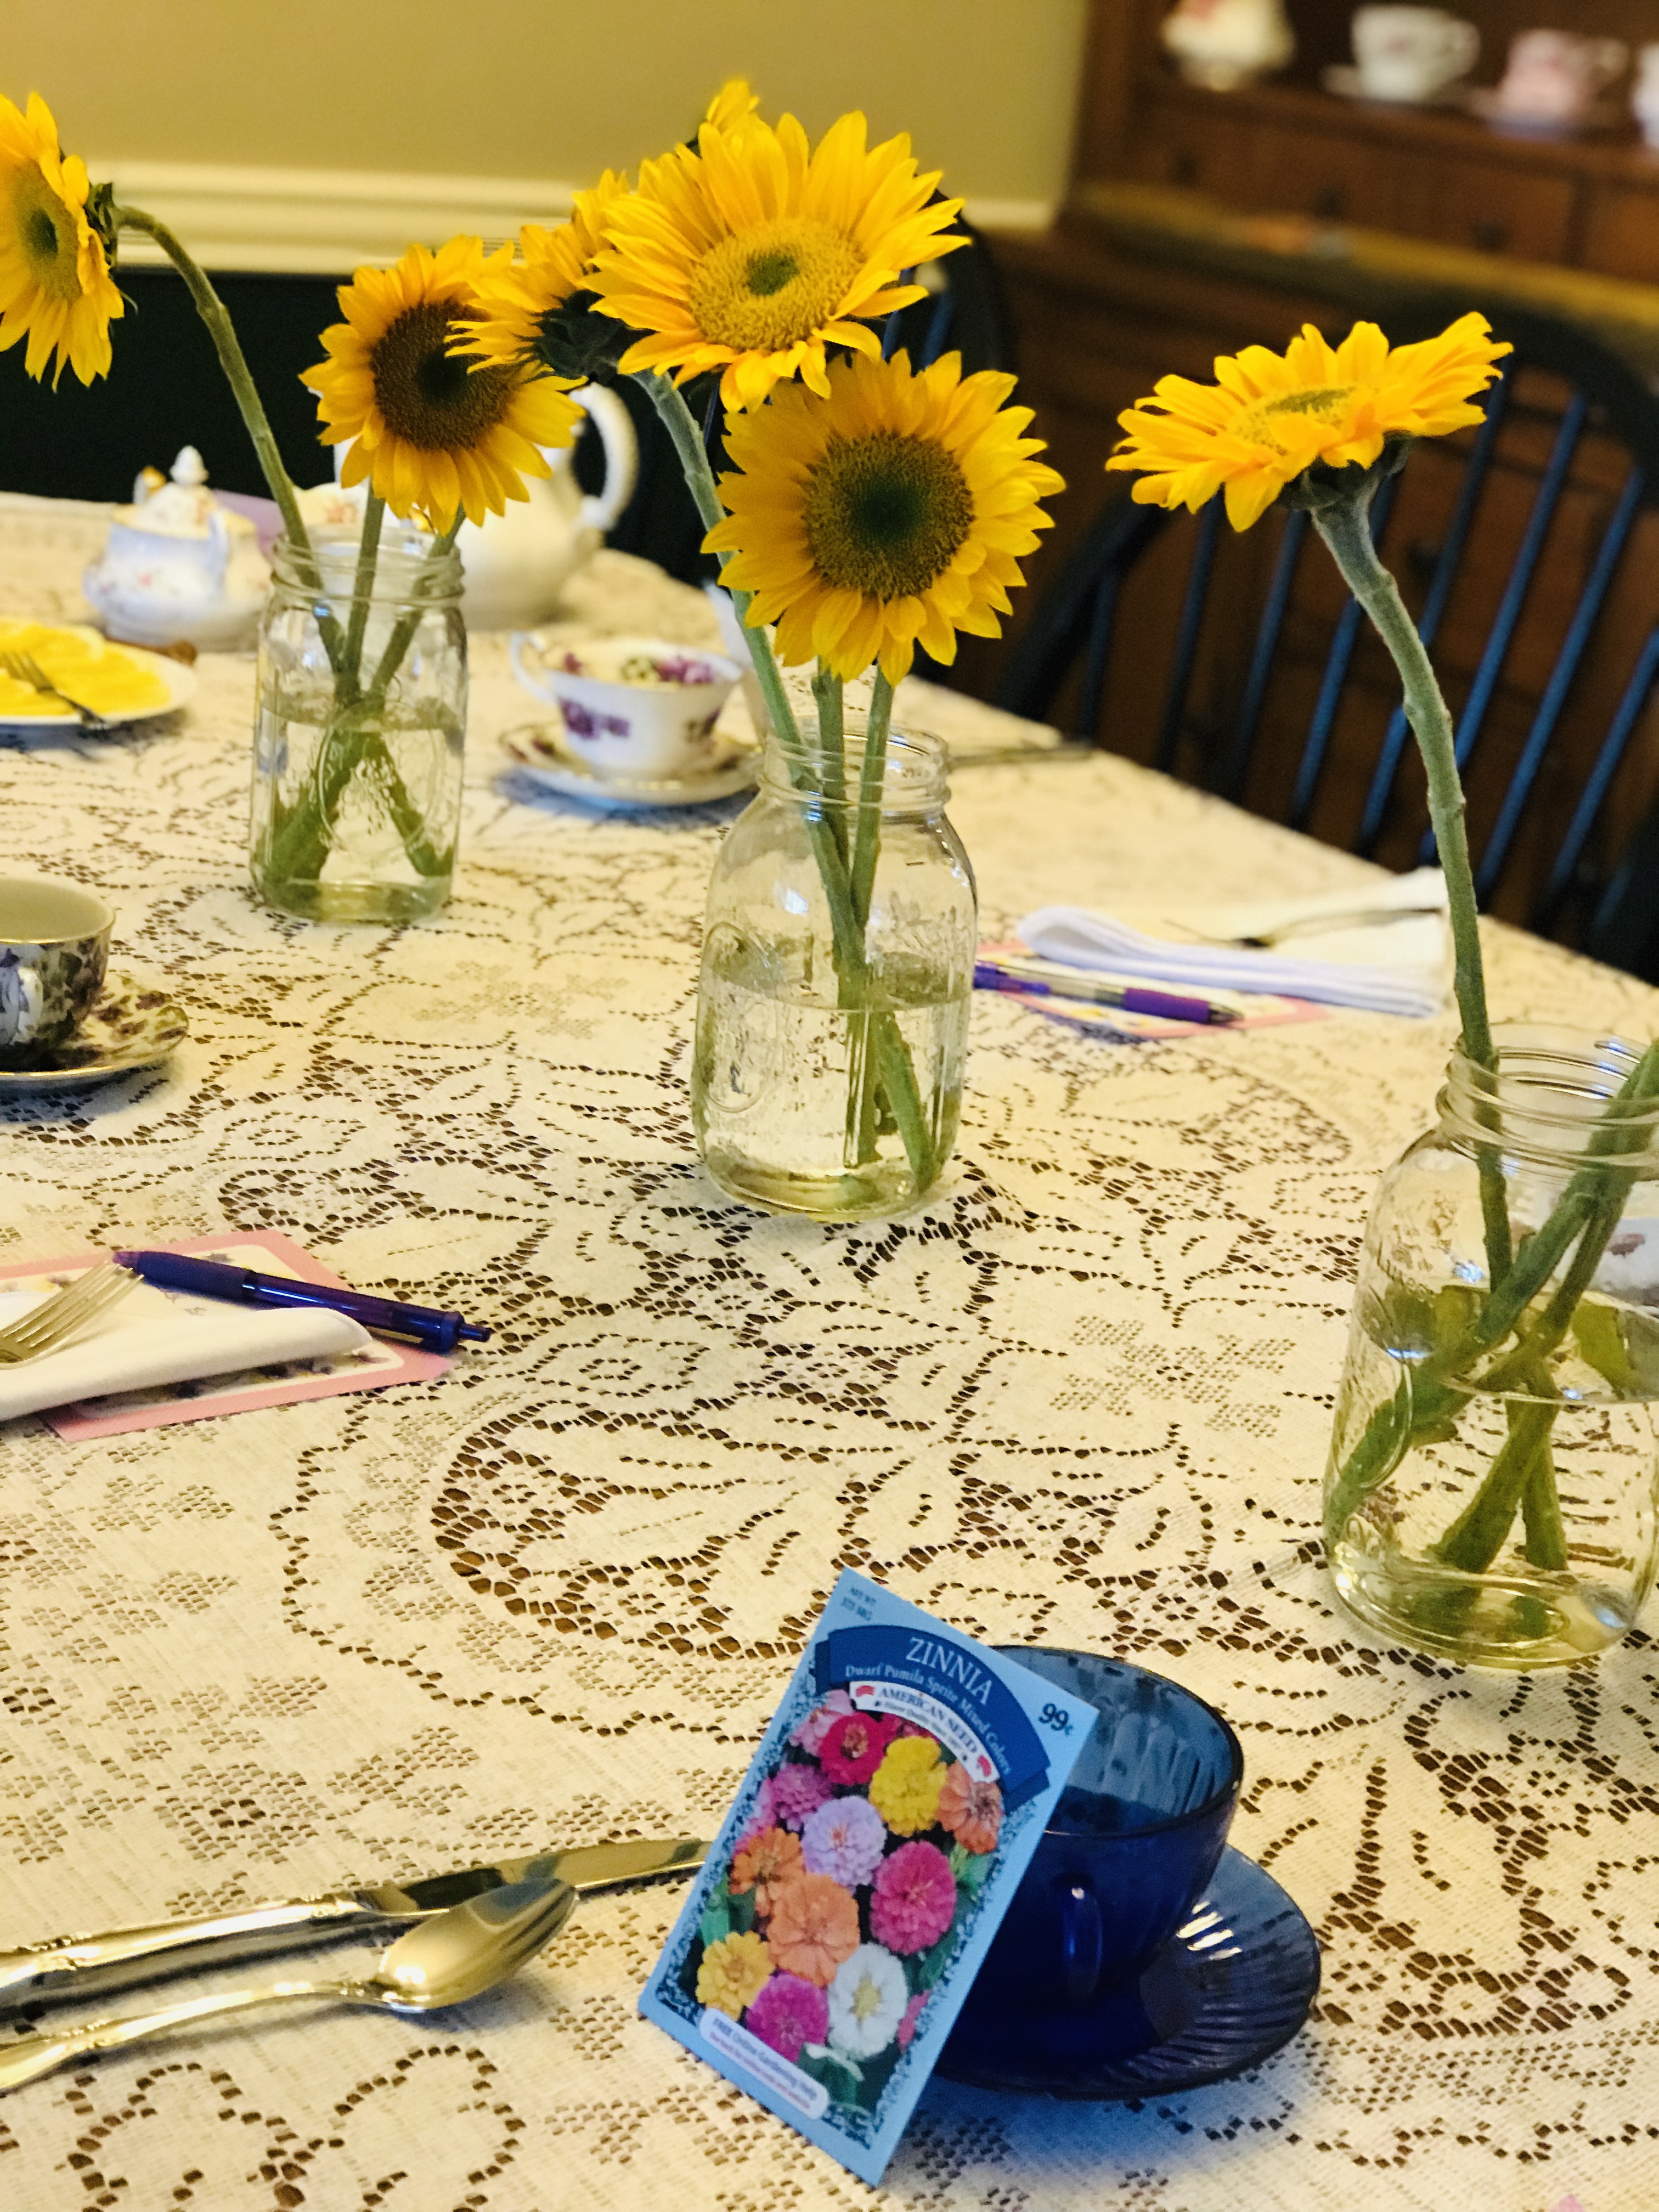 Plum Deluxe Tea Party & Plum Deluxe Tea Review! Read about my annual birthday tea party featuring Plum Deluxe Tea! #PlumDeluxeTea #TeaParty #hospitality